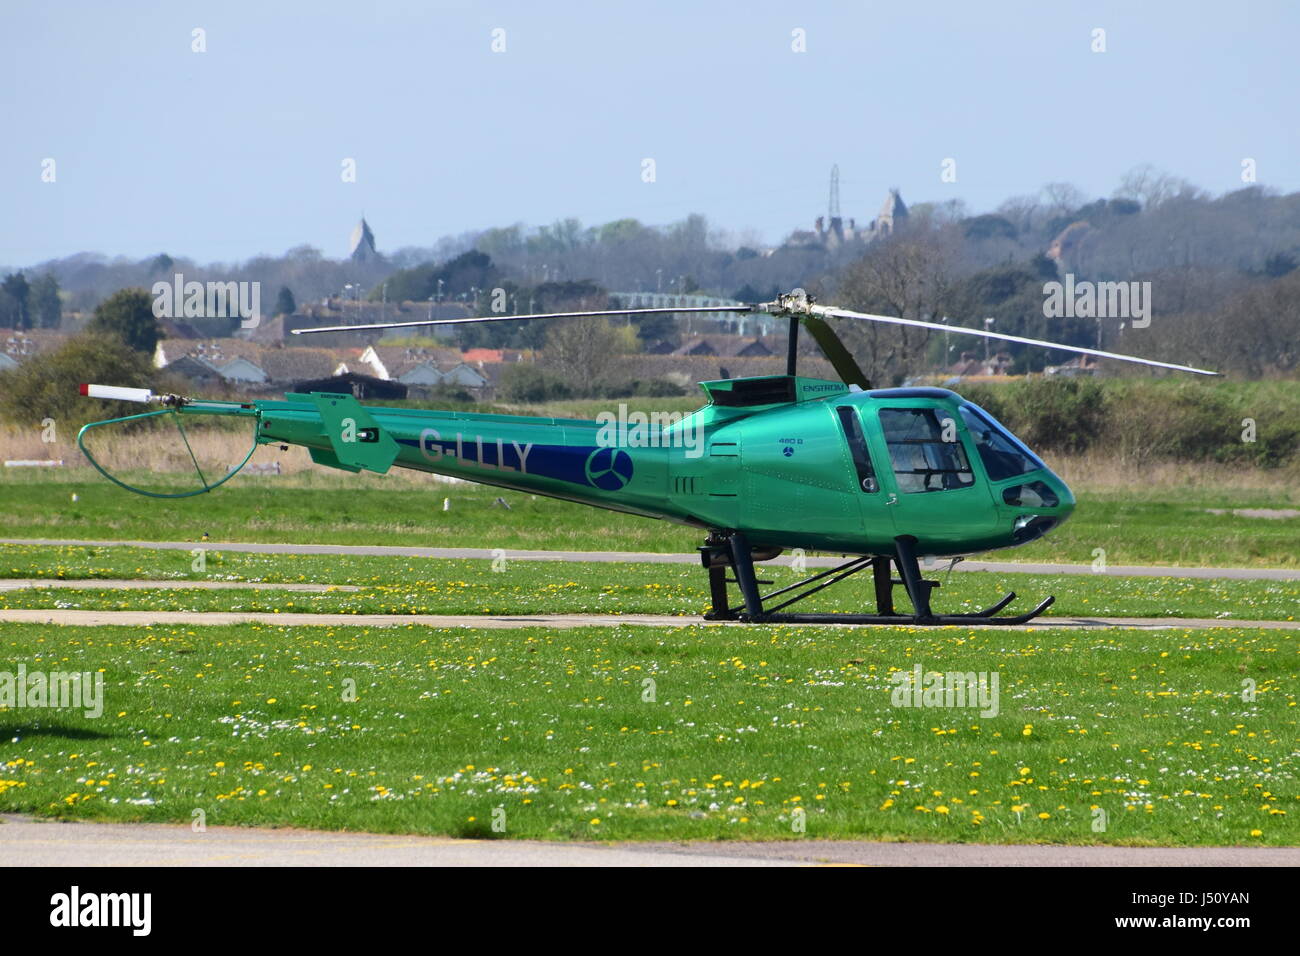 G-LLLY, Enstrom 480B, green helicopter, Brighton City Airport, Shoreham West Sussex Stock Photo